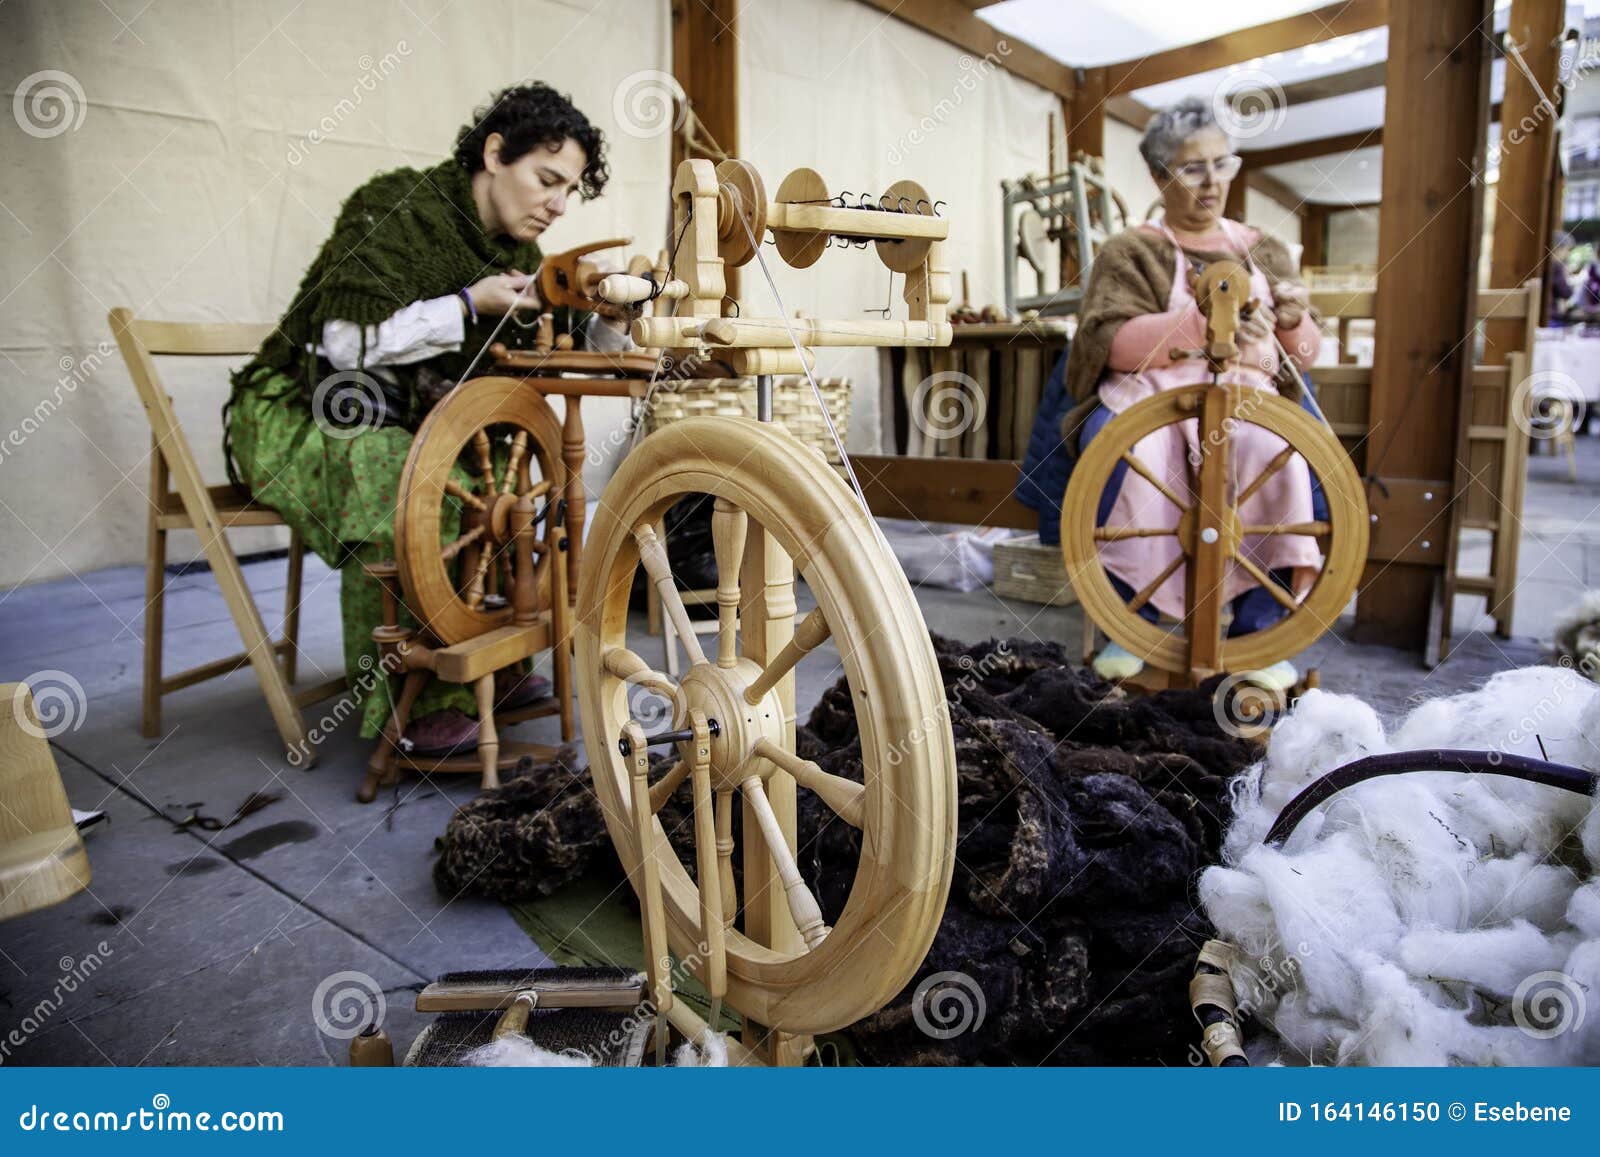 Women Spinning Thread with a Wooden Spinning Wheel Stock Photo